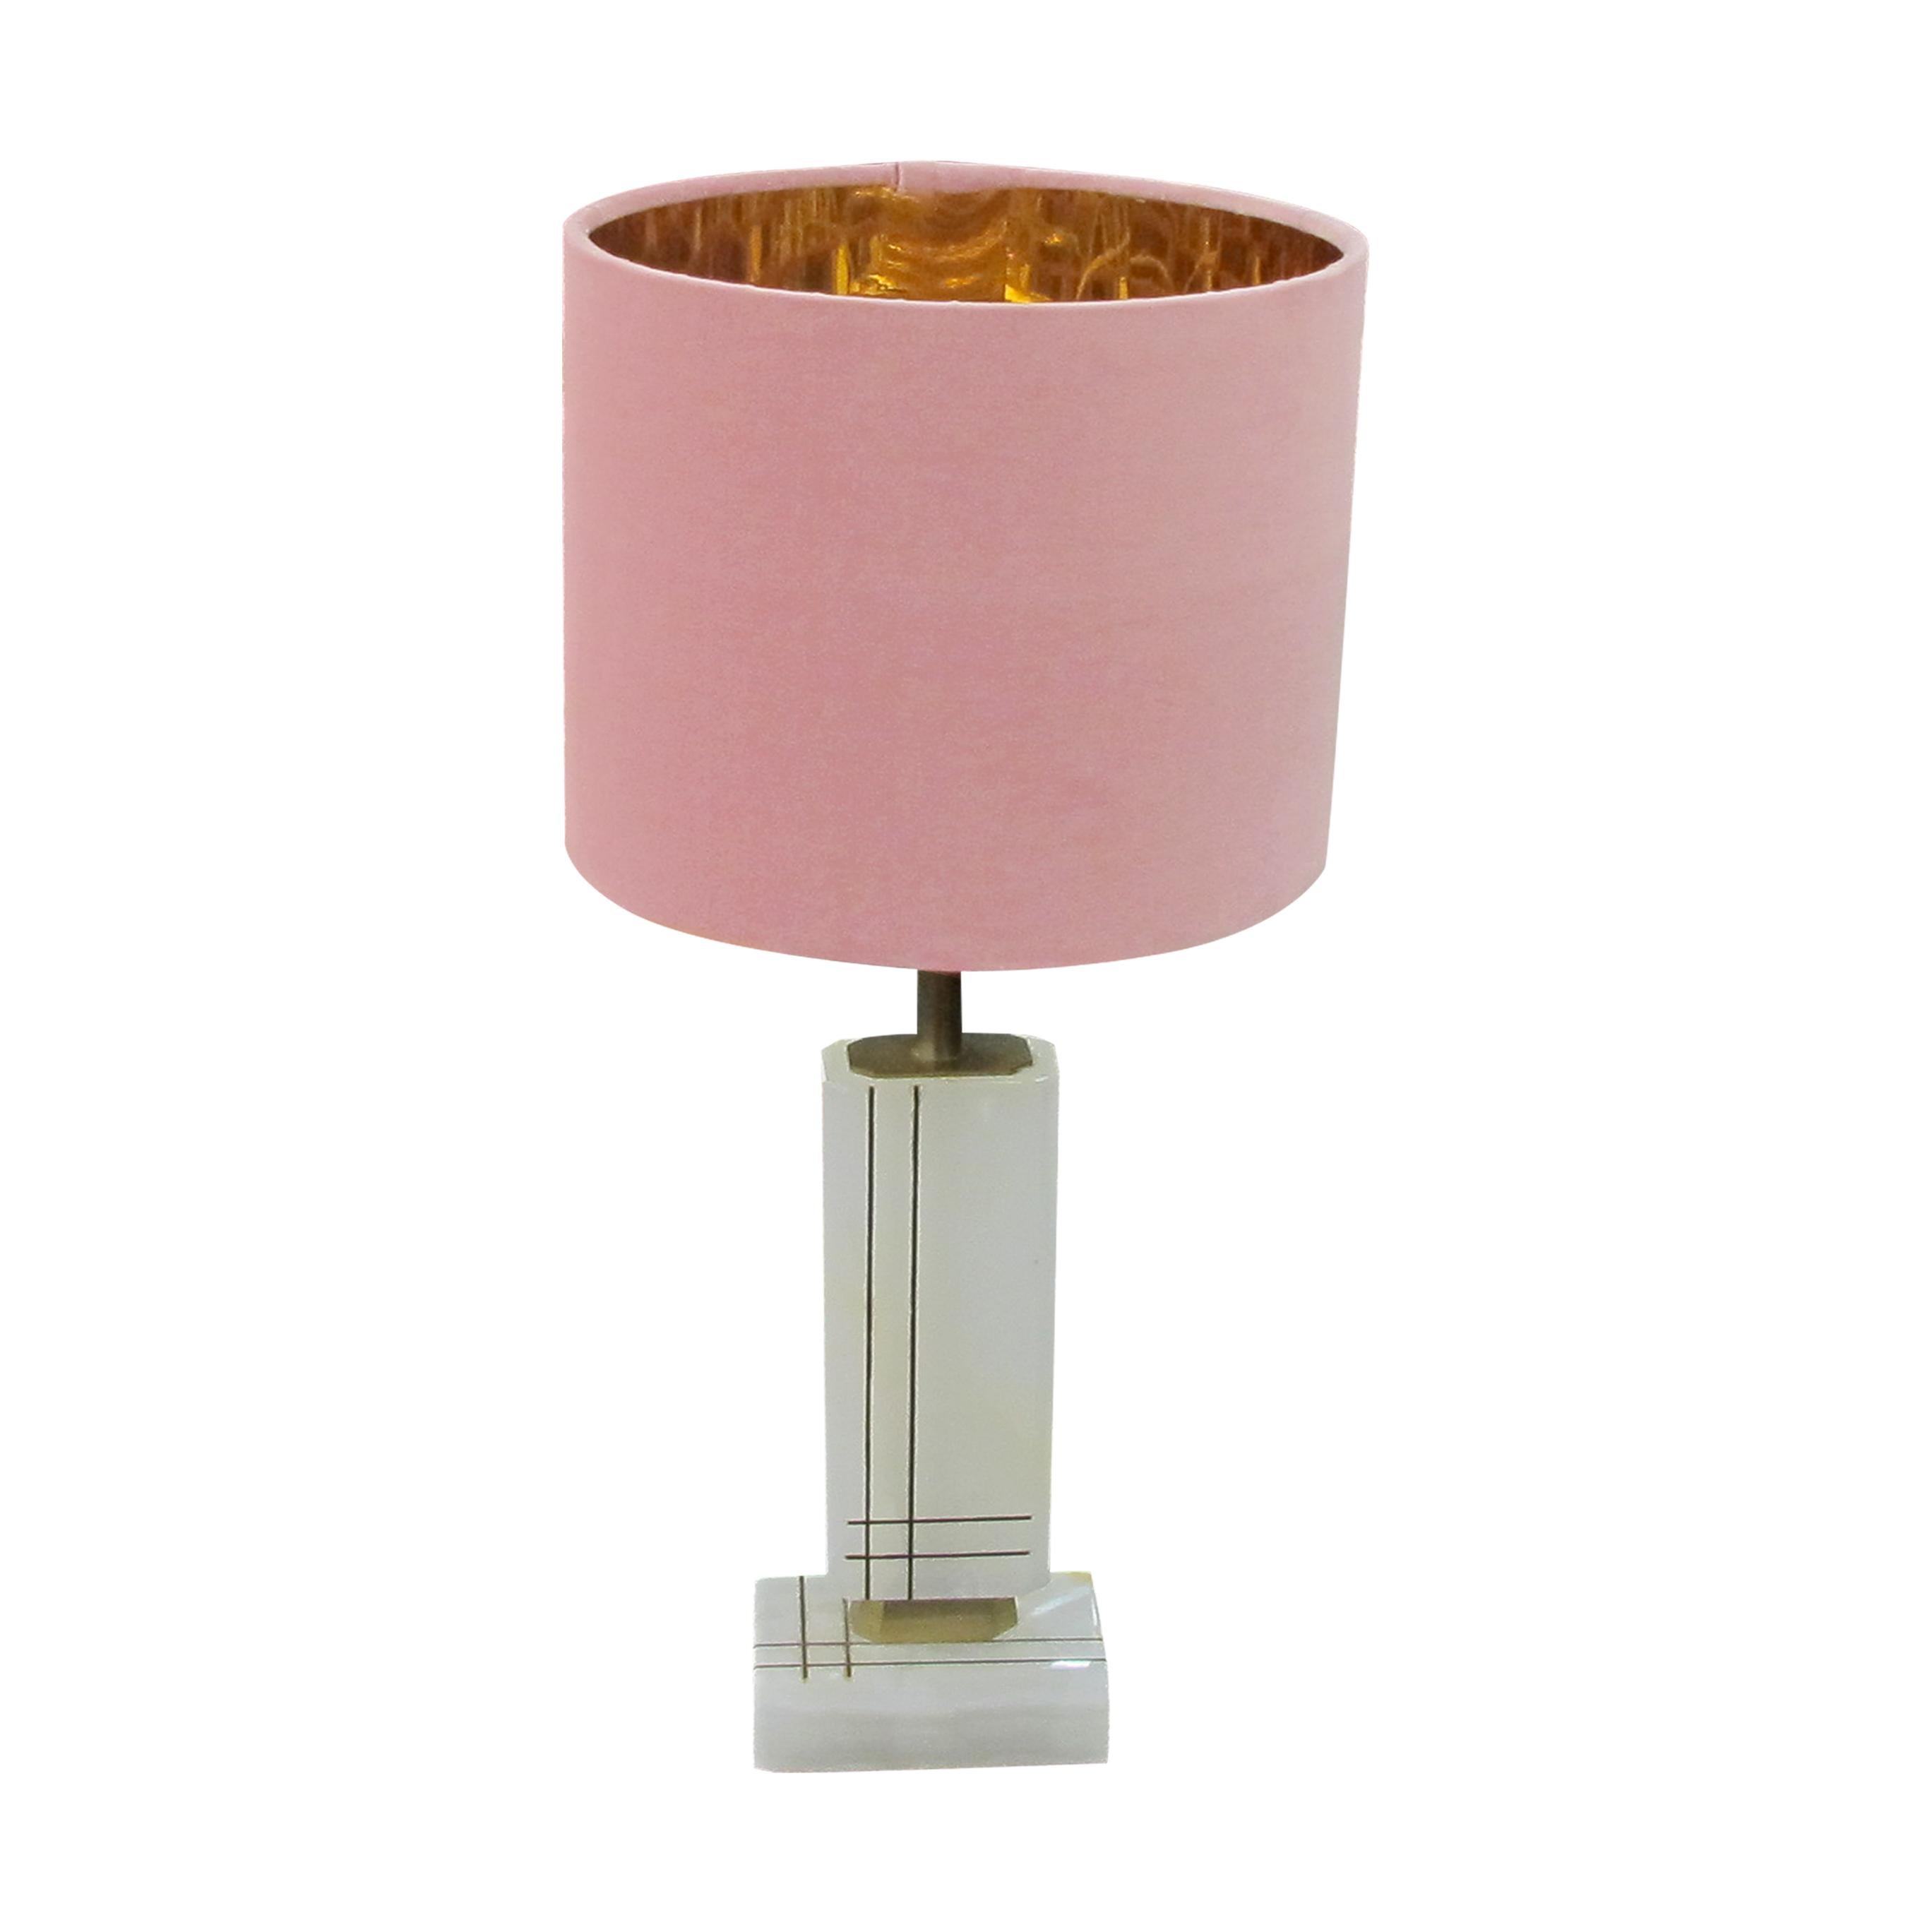 Other Pair of White Onyx Structural Table Lamps with Pink Shades, Italian 1960s For Sale